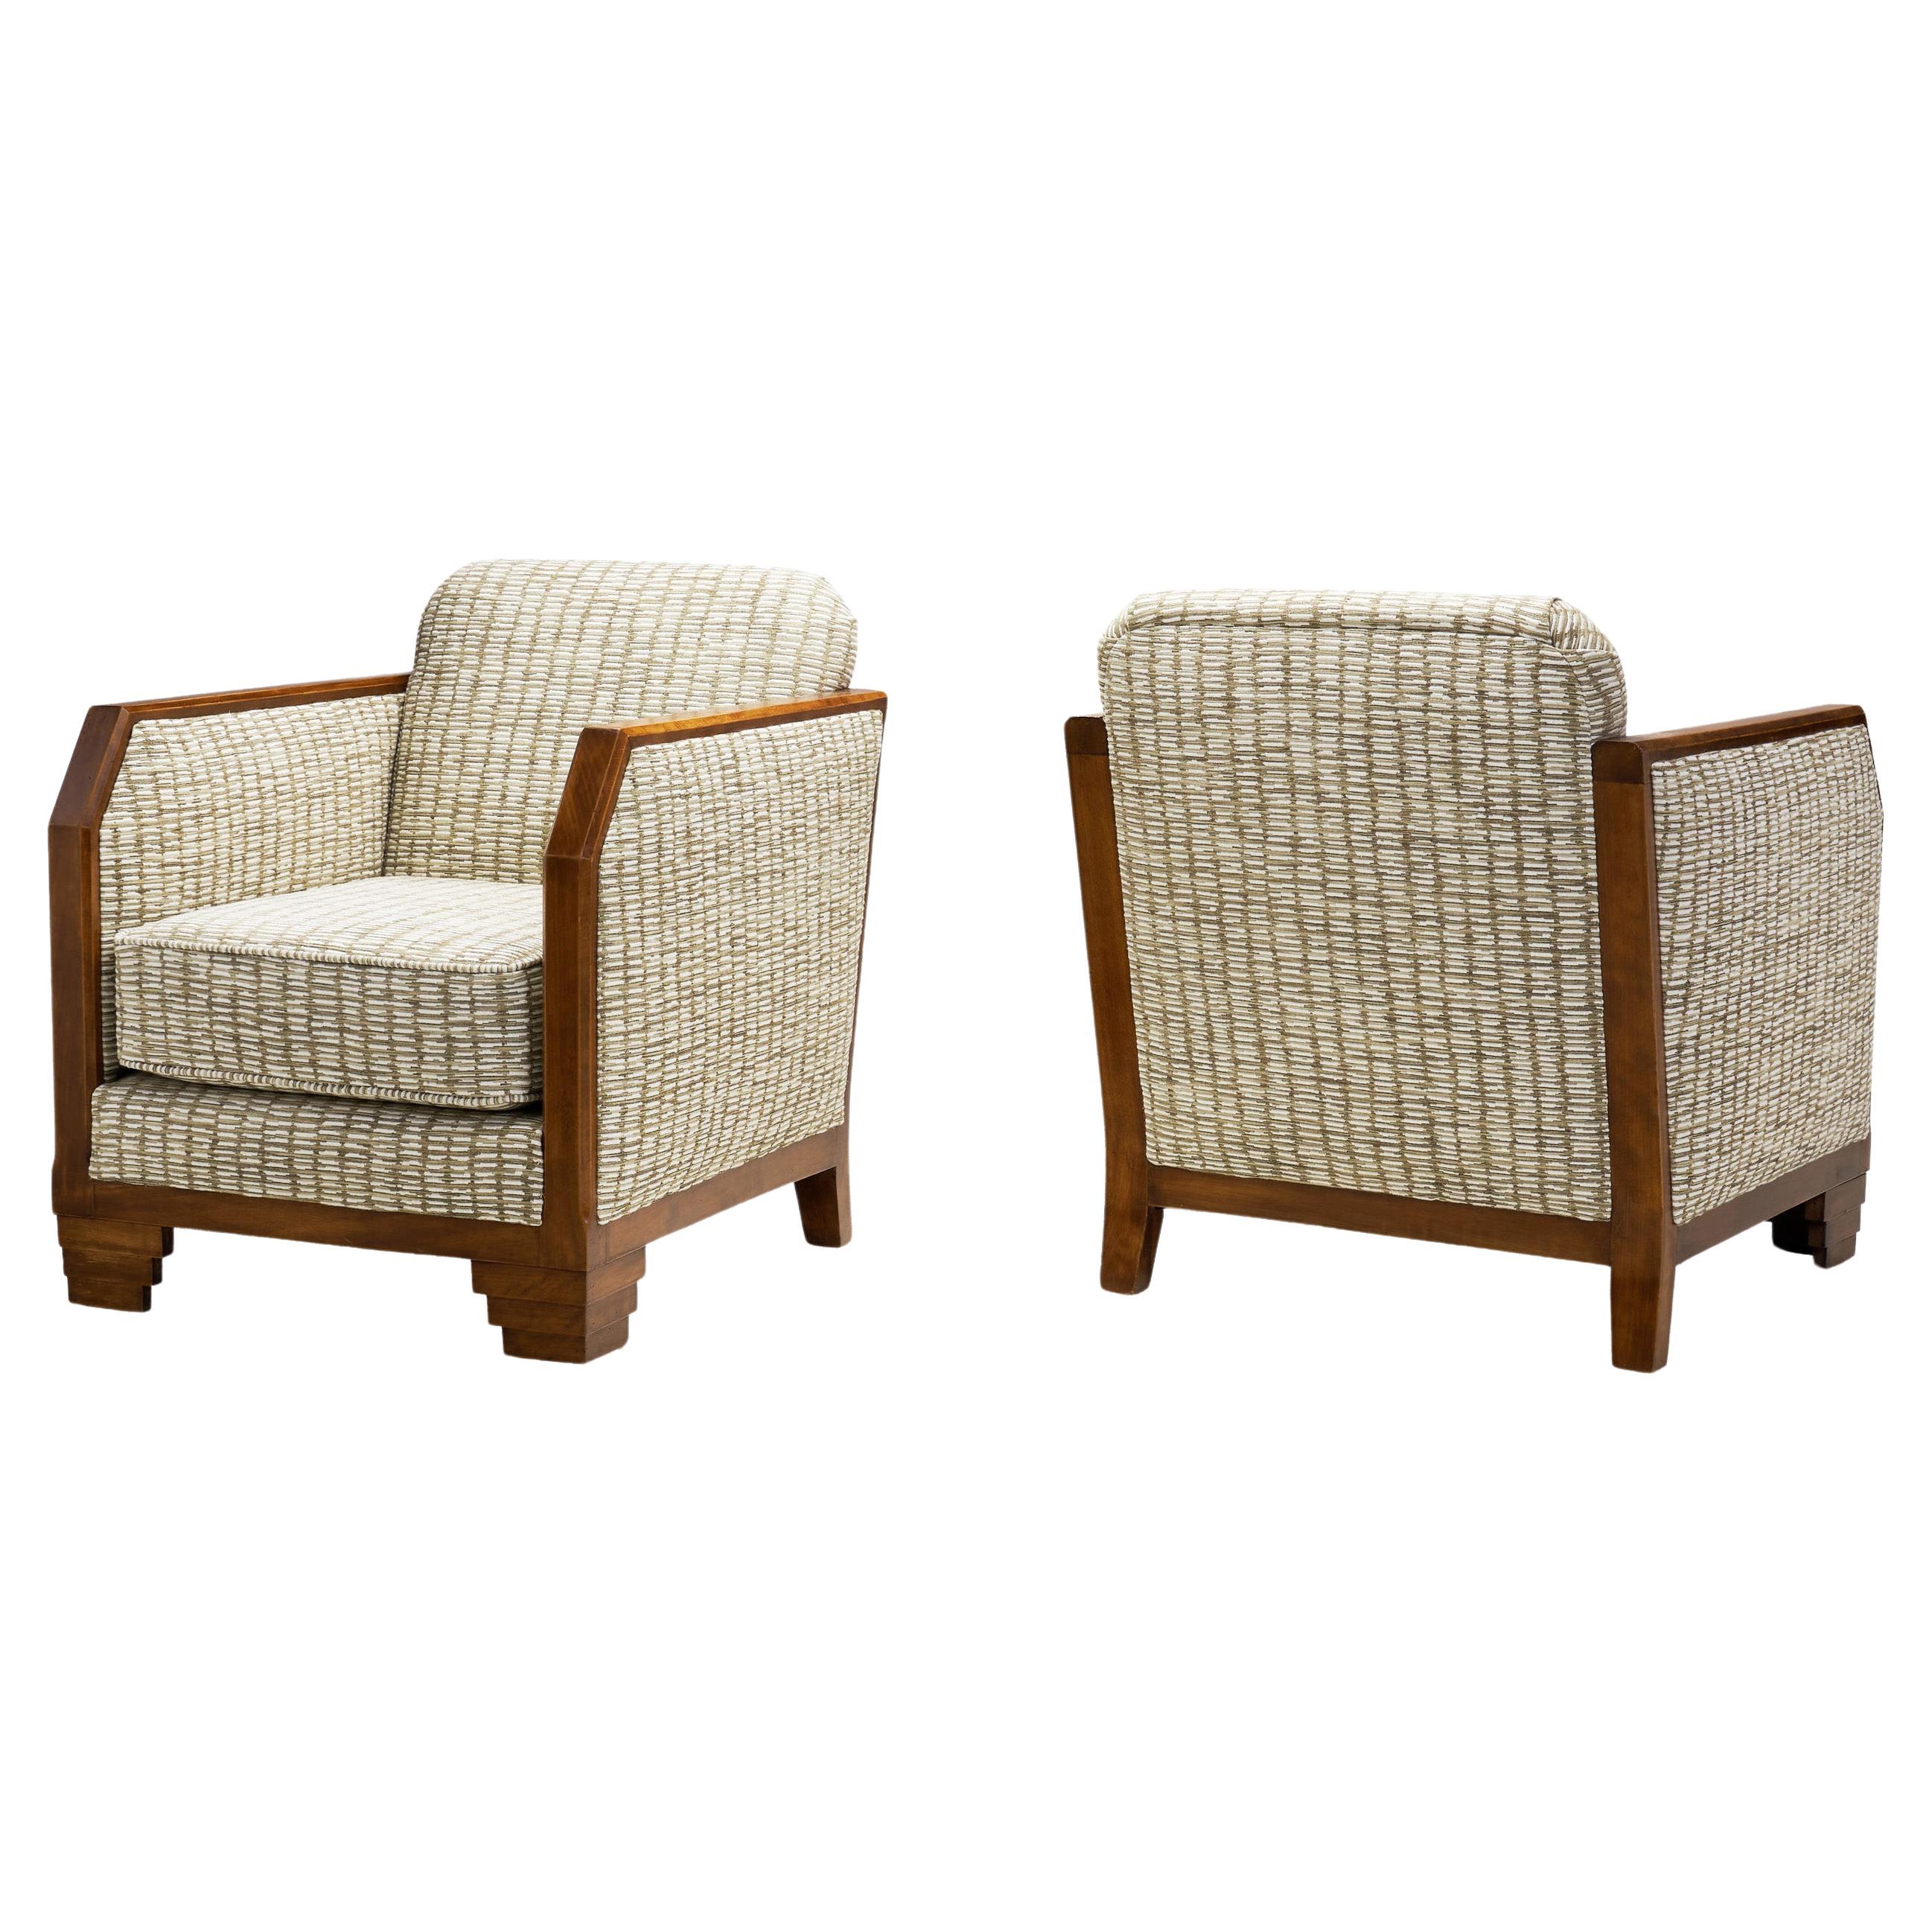 Pair of Wooden Frame Art Deco Armchairs, France ca 1940s For Sale